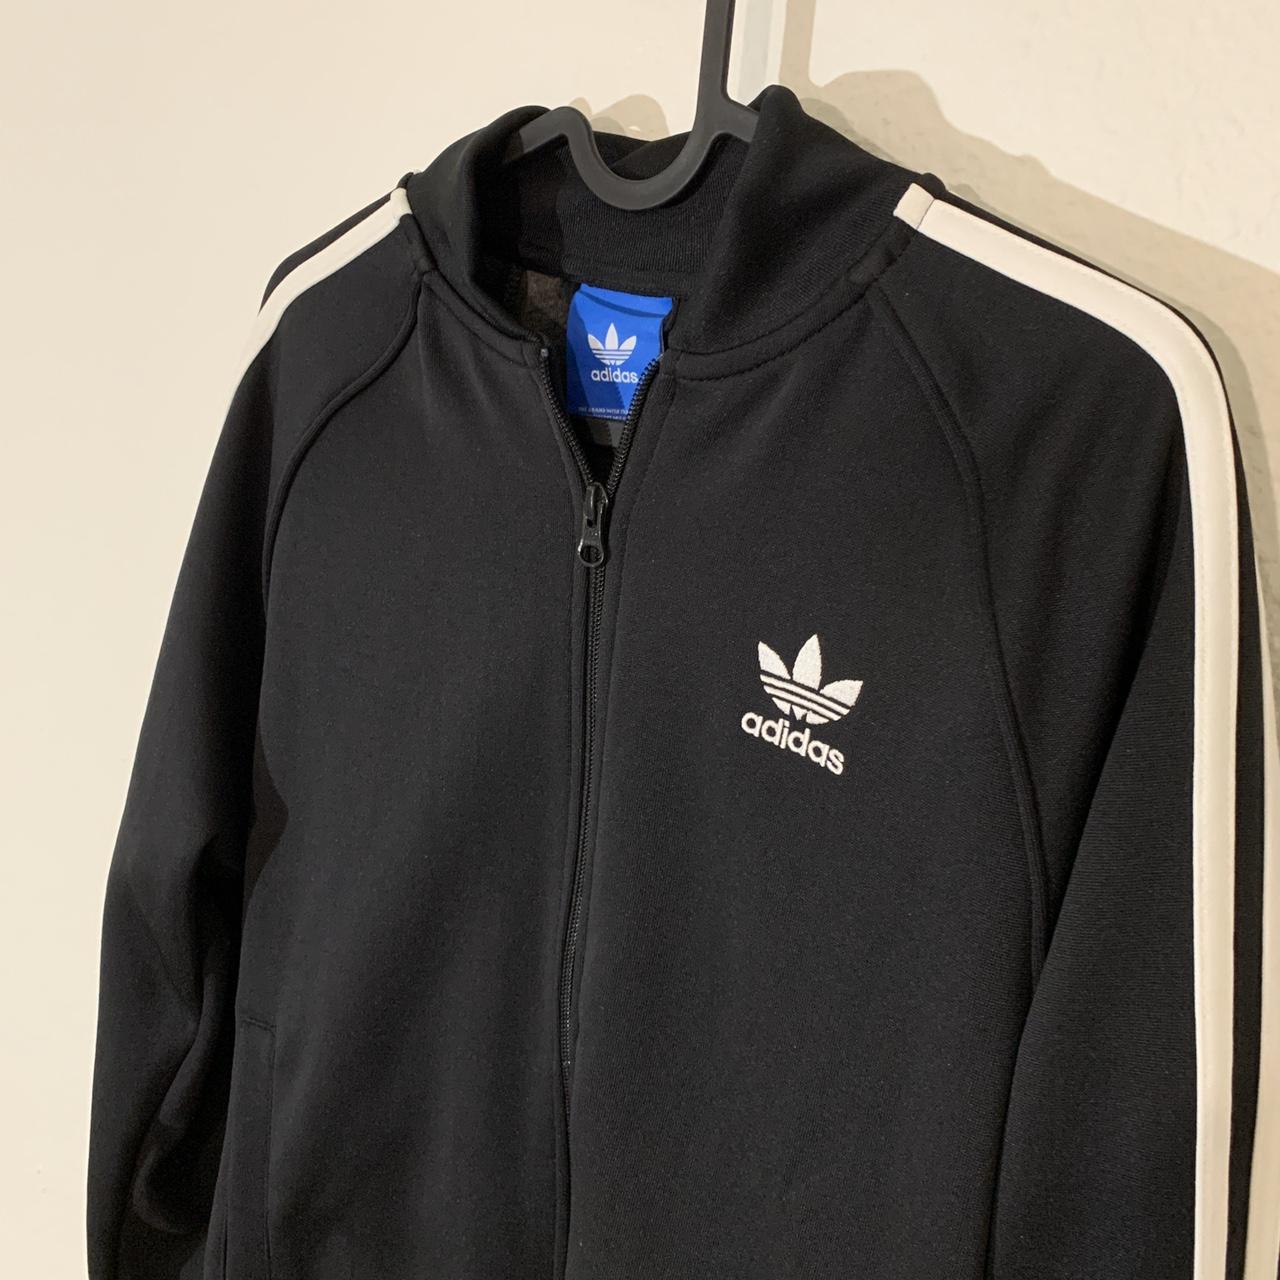 Adidas track jacket. Like new. Note: items are... - Depop